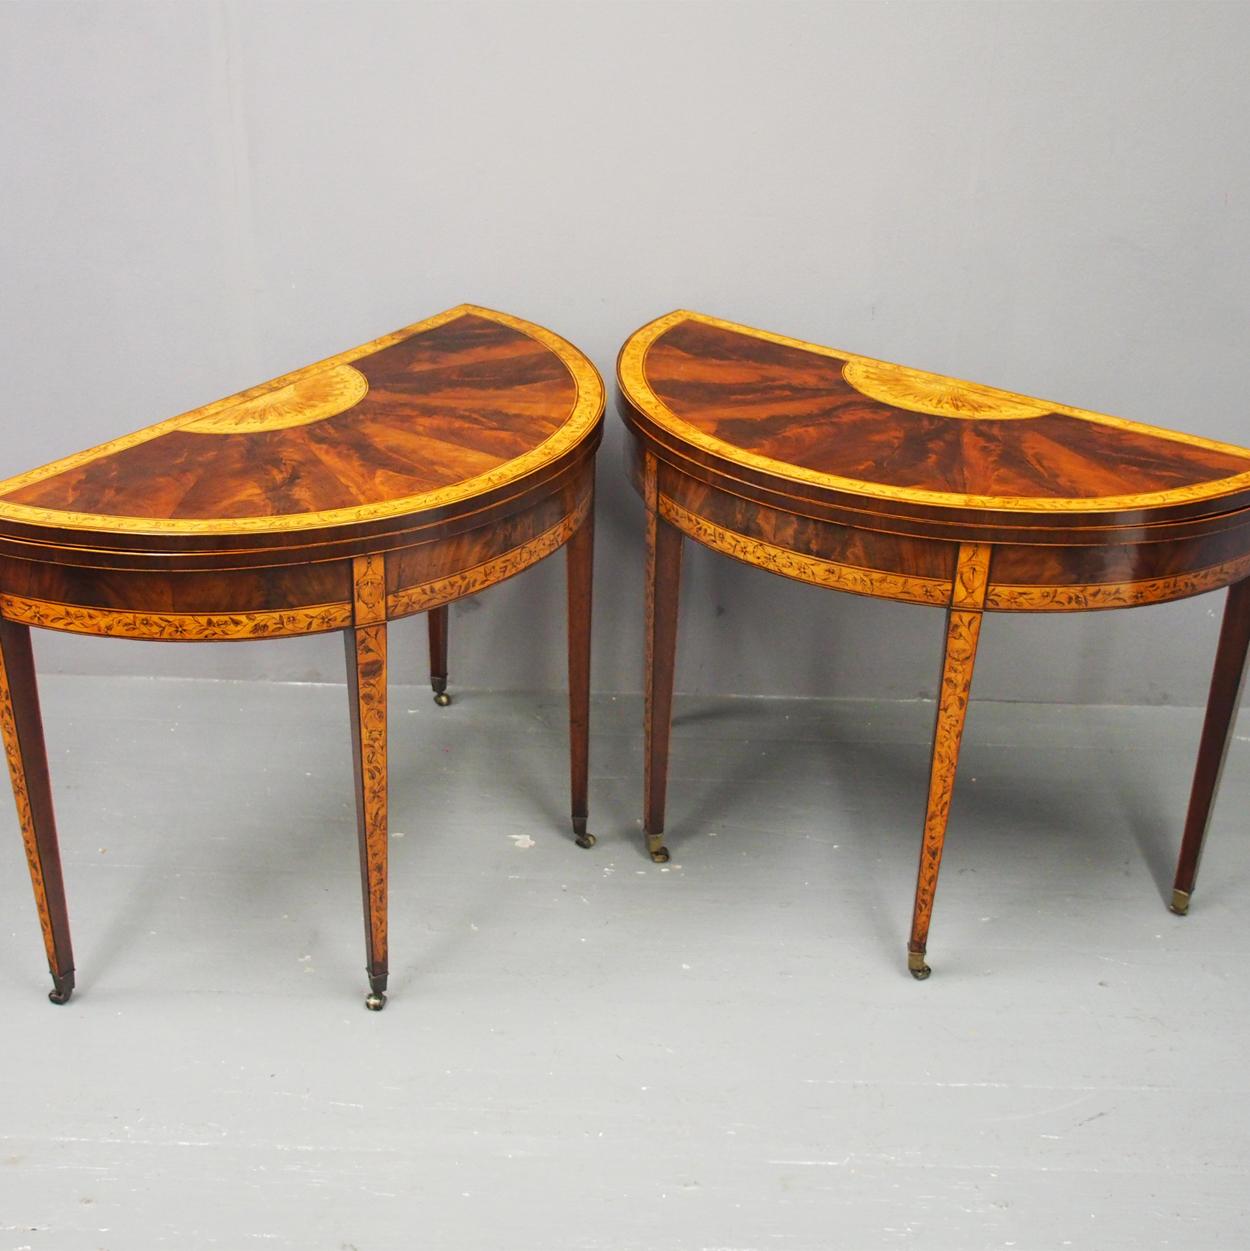 Pair of George III mahogany inlaid and penwork demilune games tables, circa 1770. With their fold over tops and radial veneers centred by a sunflower motif and banding with flower trails. Opening to green baize surfaces, and raised on square